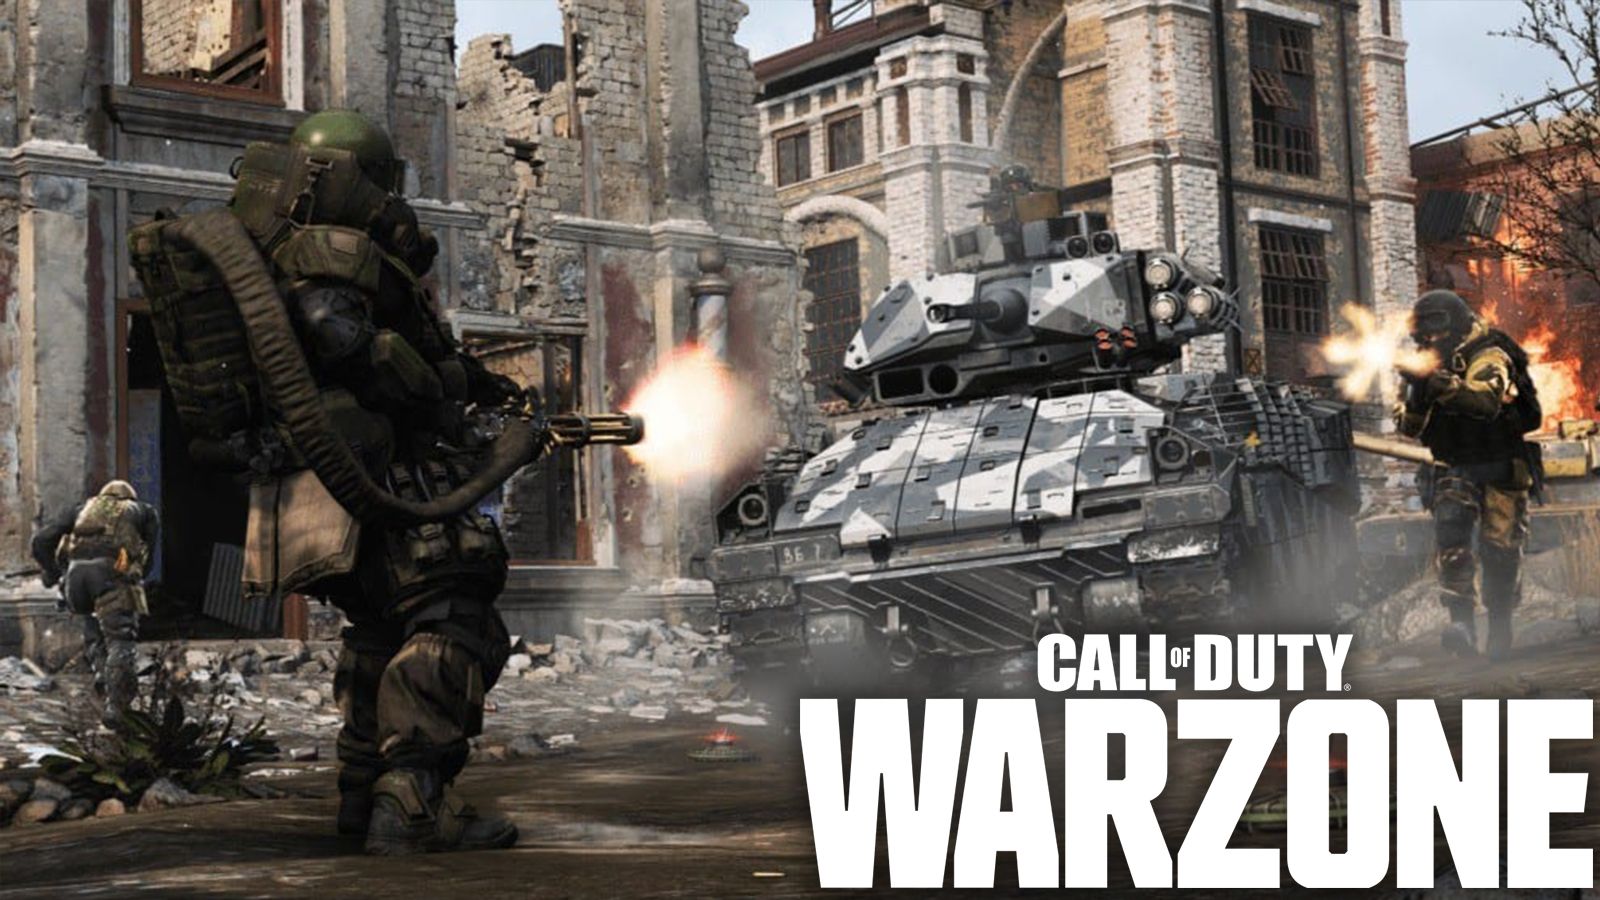 Poster of Call Of Duty Warzone Wallpapers